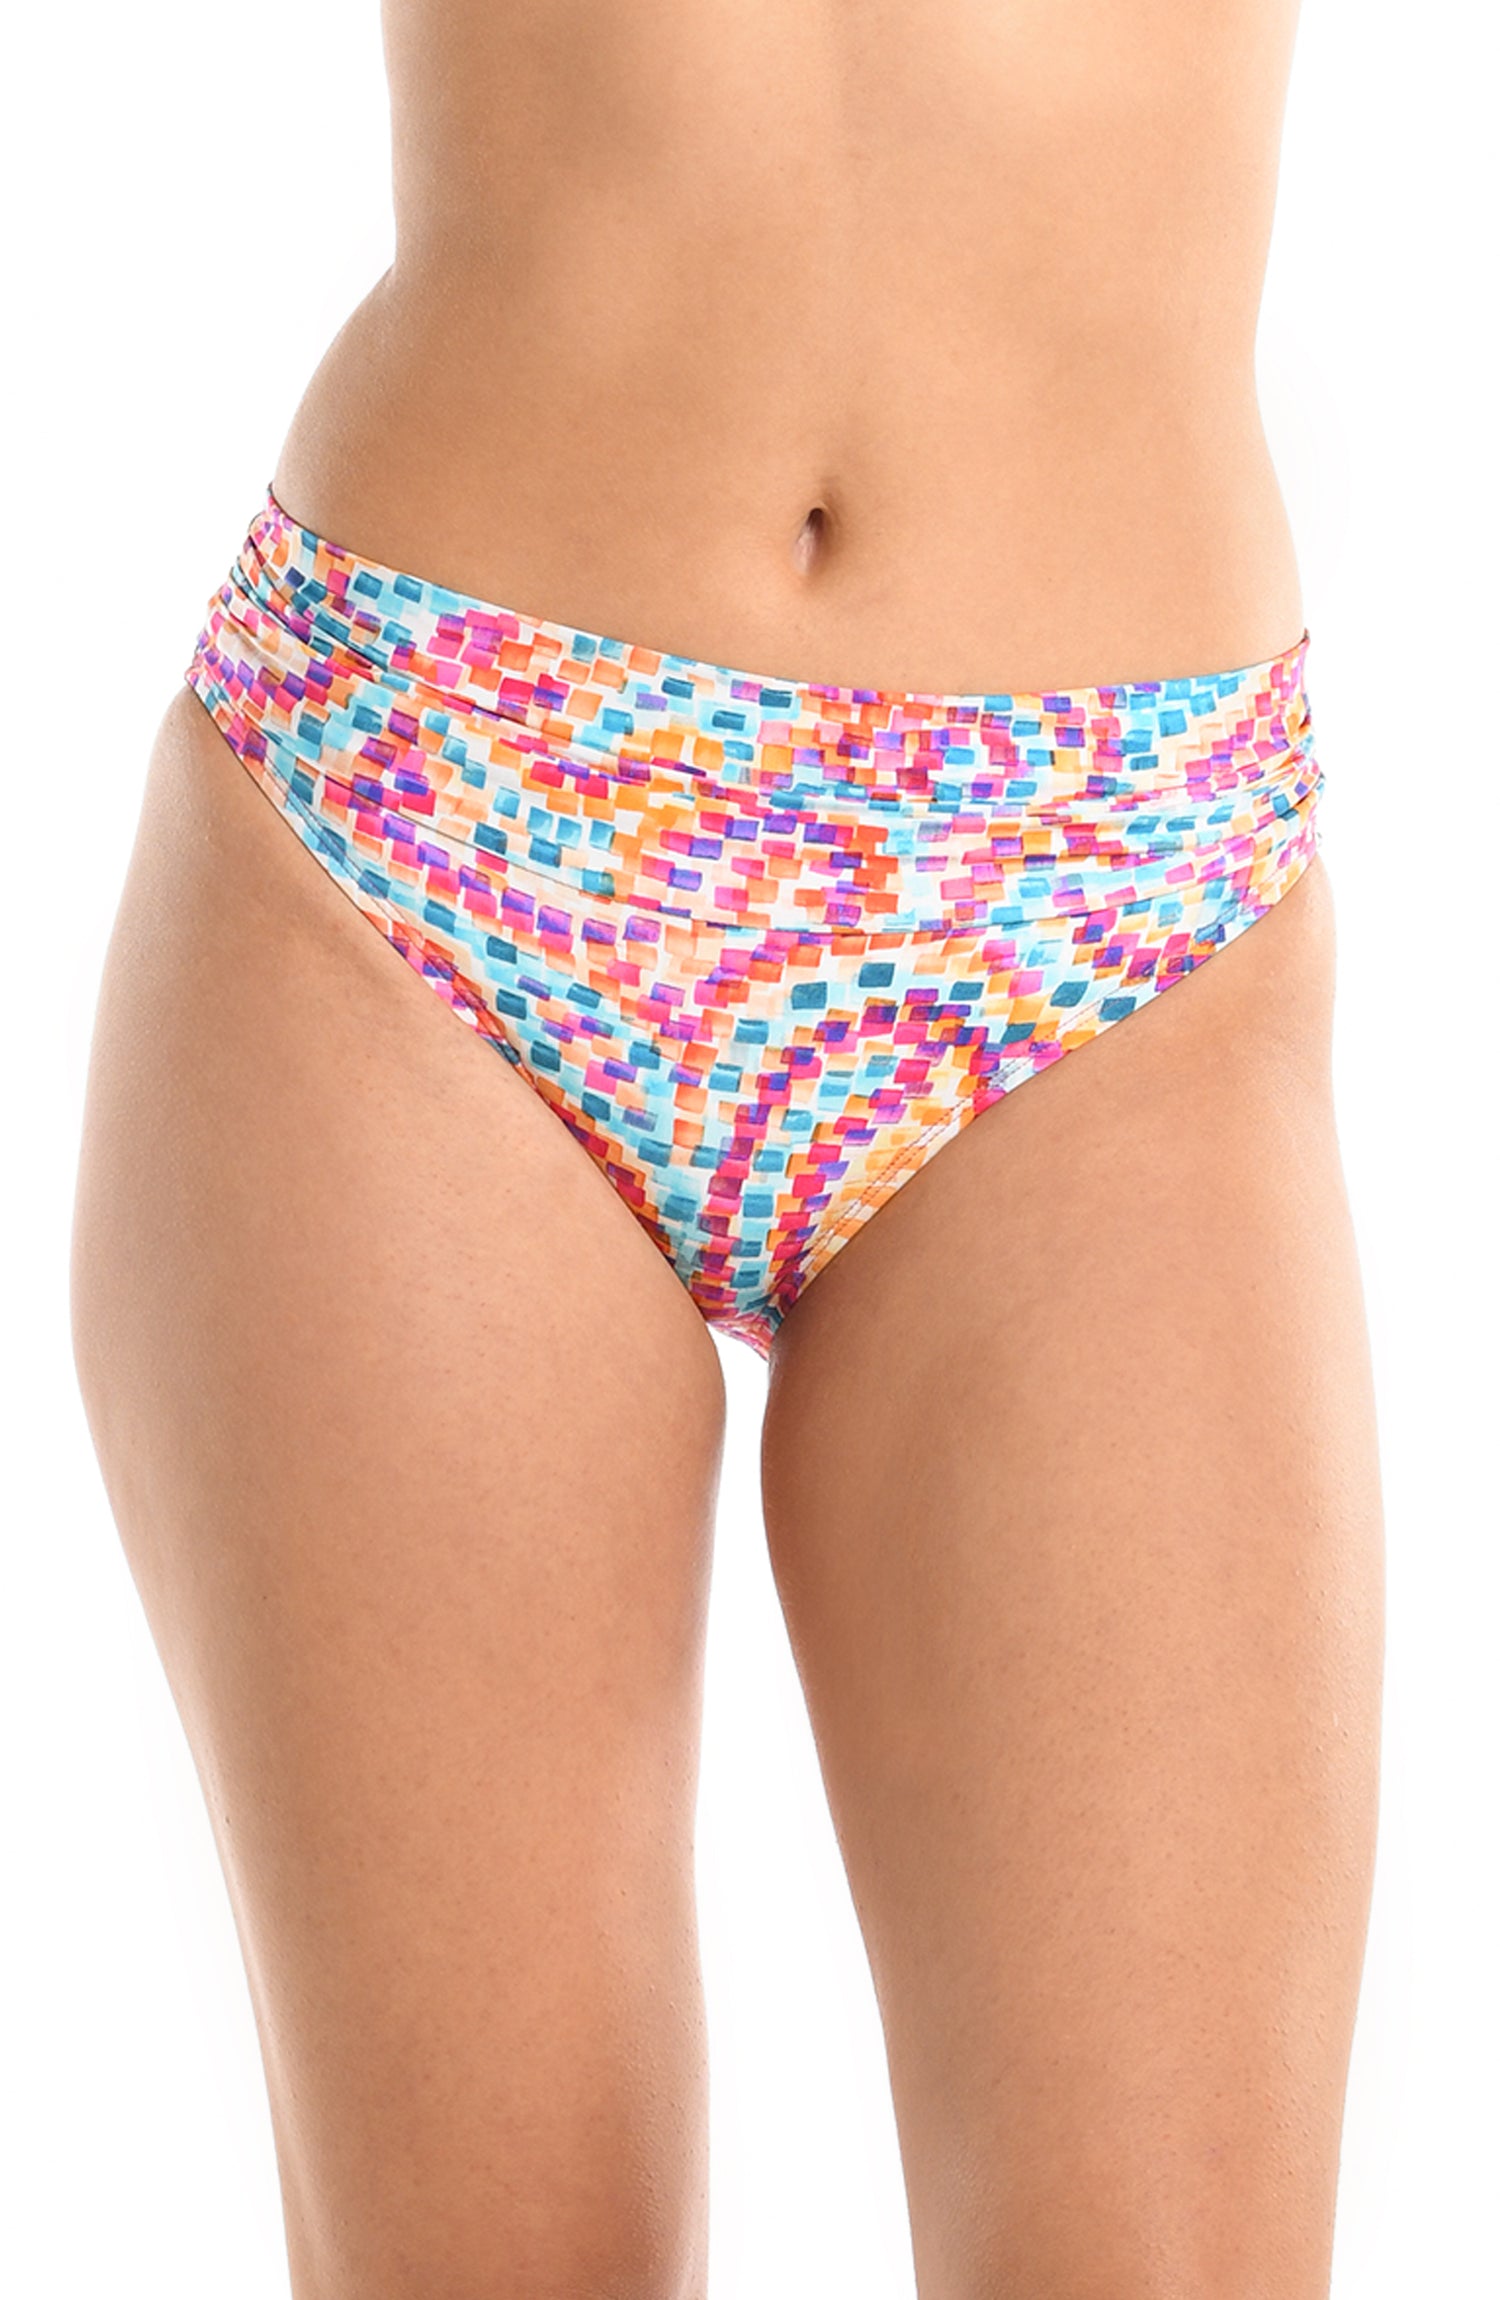 Model is wearing a pink multicolored paisley printed shirred band hipster bikini bottom from our Pebble Beach collection.